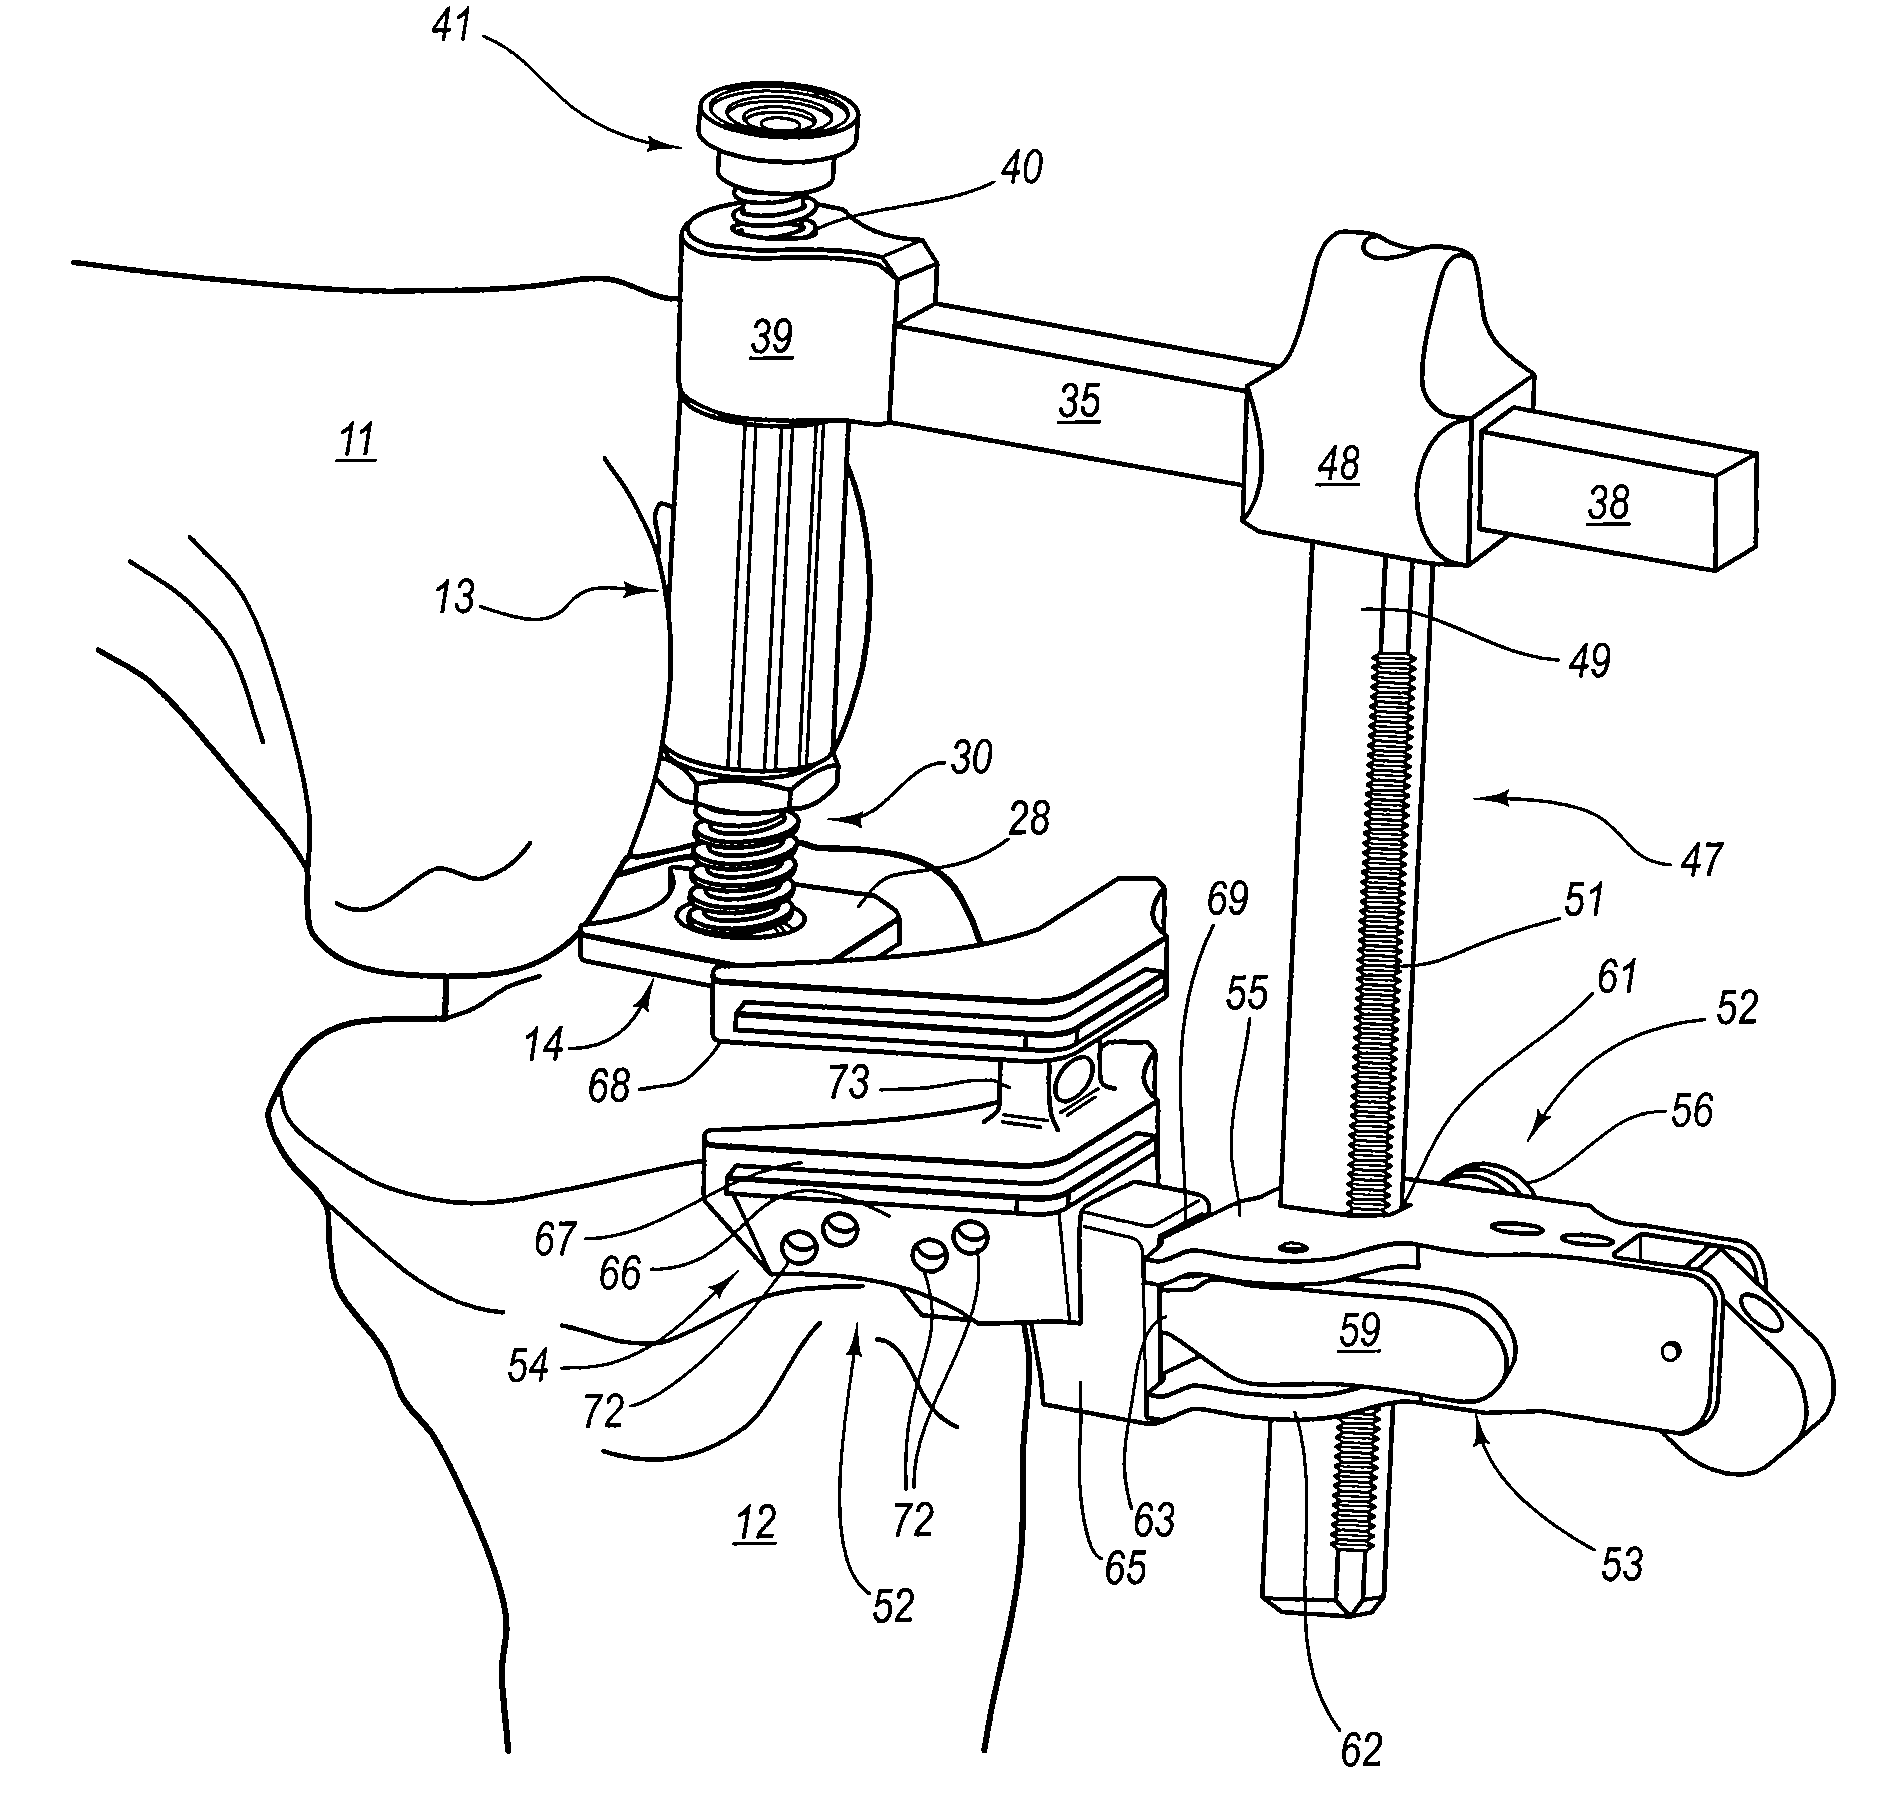 Arthroplasty systems and methods for optimally aligning and tensioning a knee prosthesis